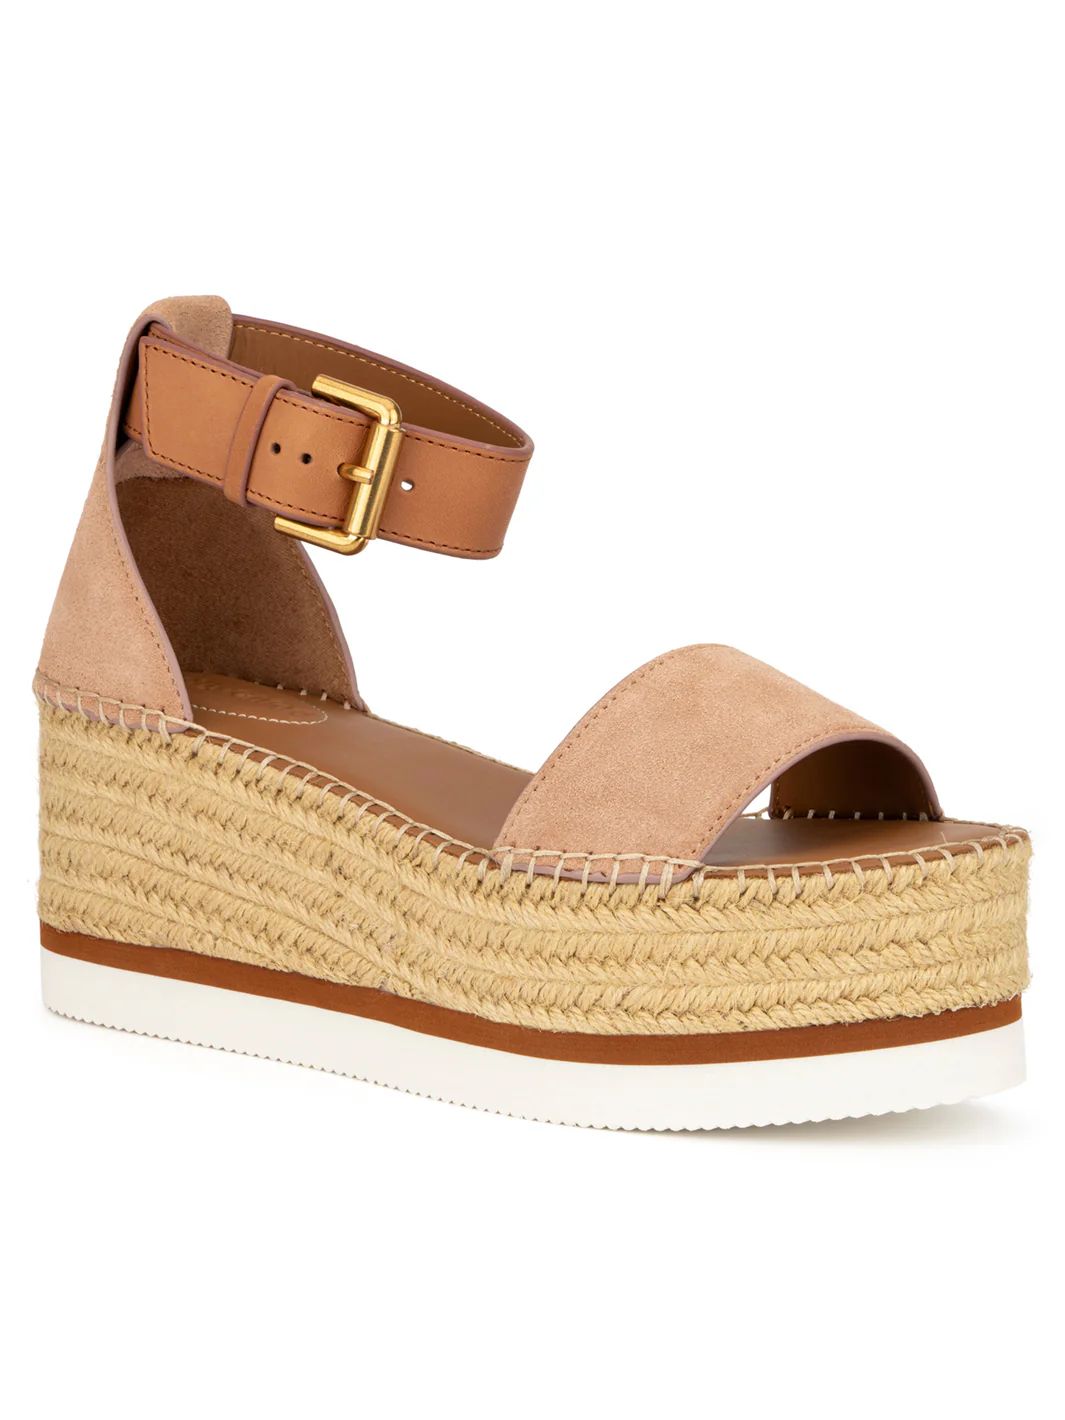 See By Chloe Women's Glyn Wedge Platform Espadrille in Pink 40 Lord & Taylor | Lord & Taylor